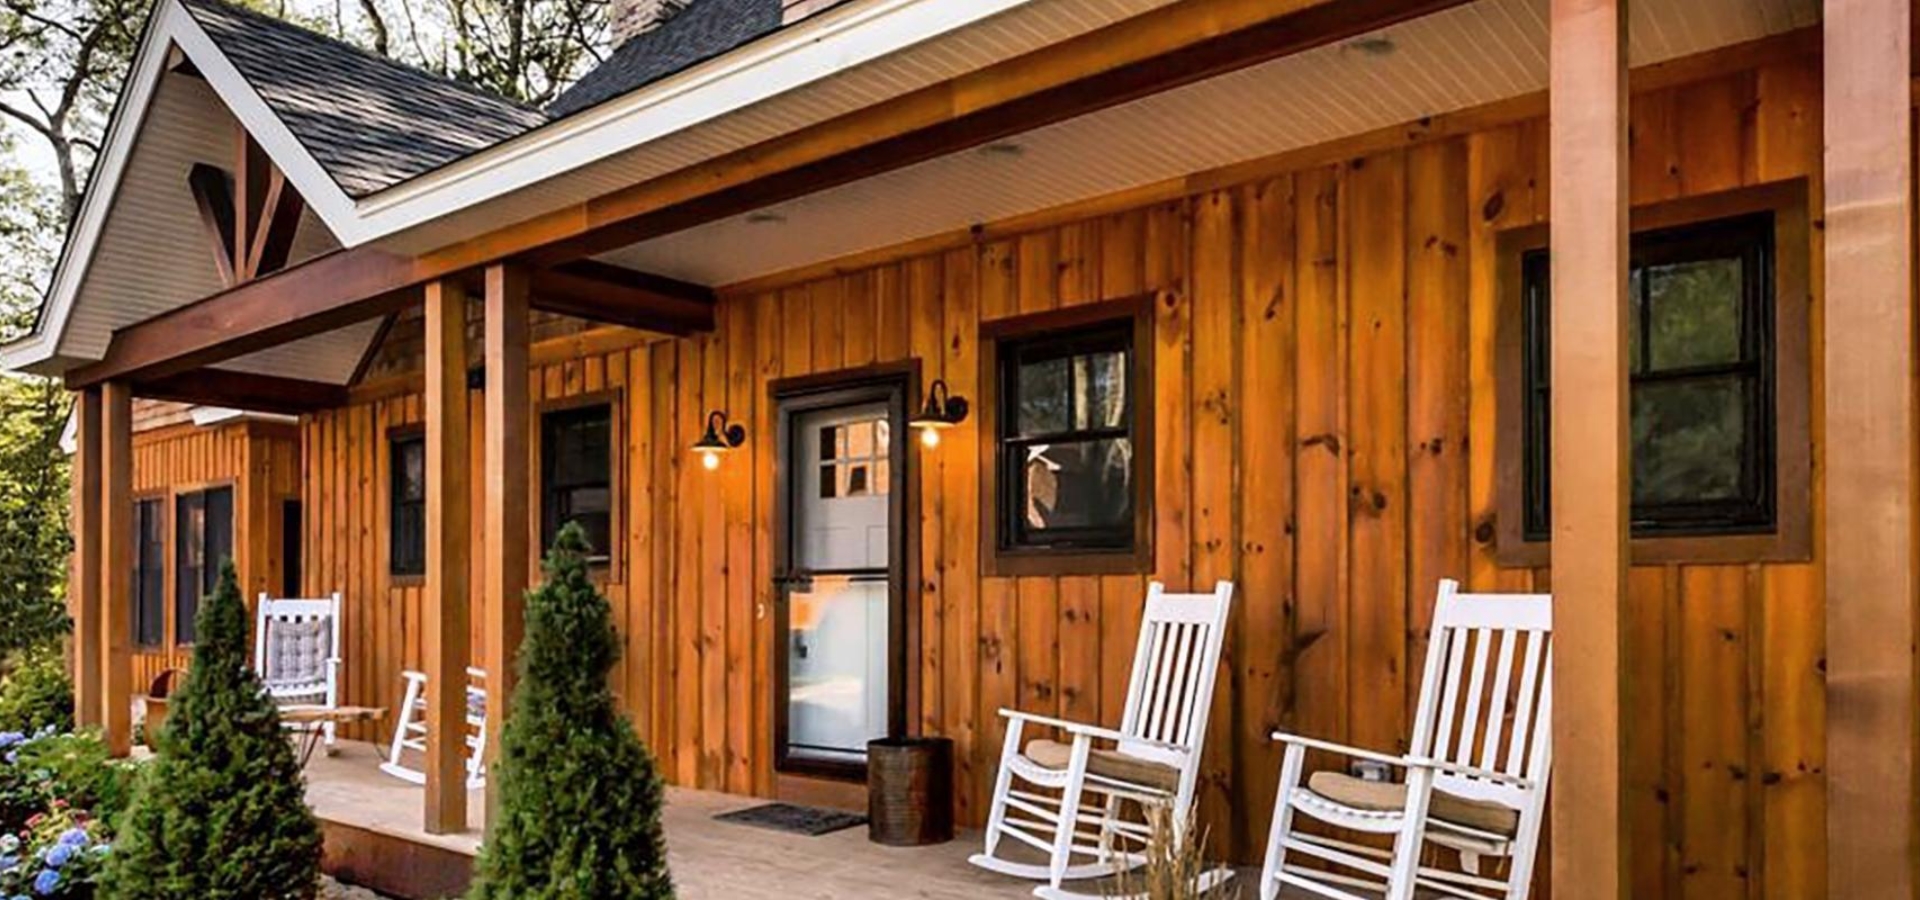 Cozy cabin at The Preserve featured in NE Home Life